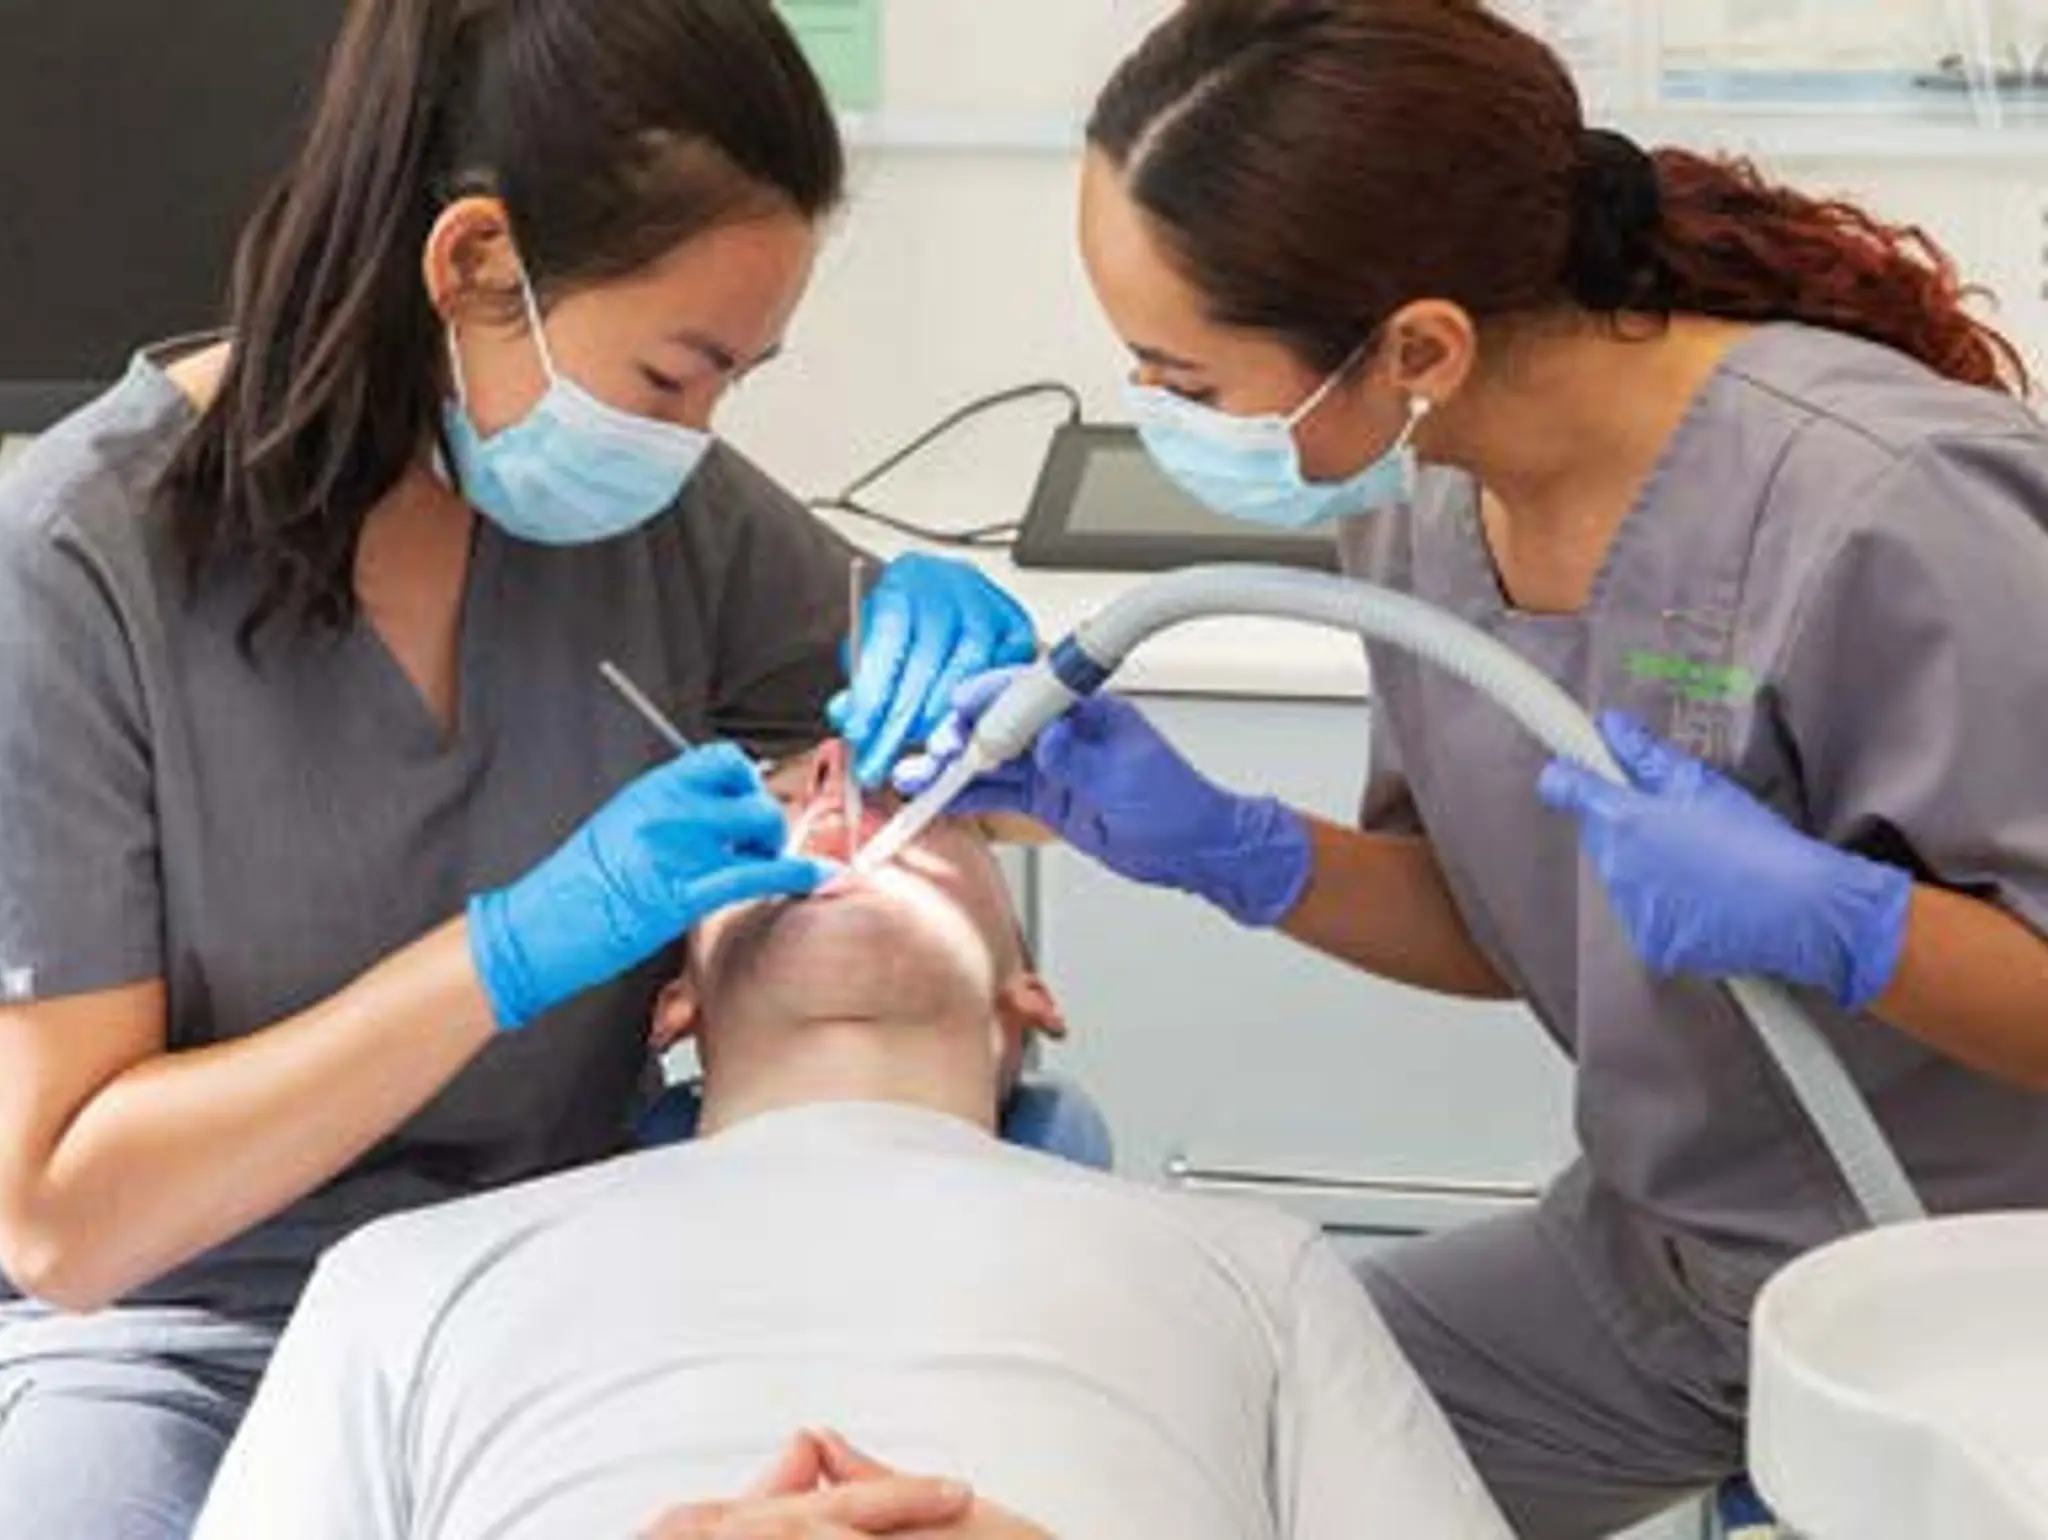 New reforms aim for better NHS dental service access